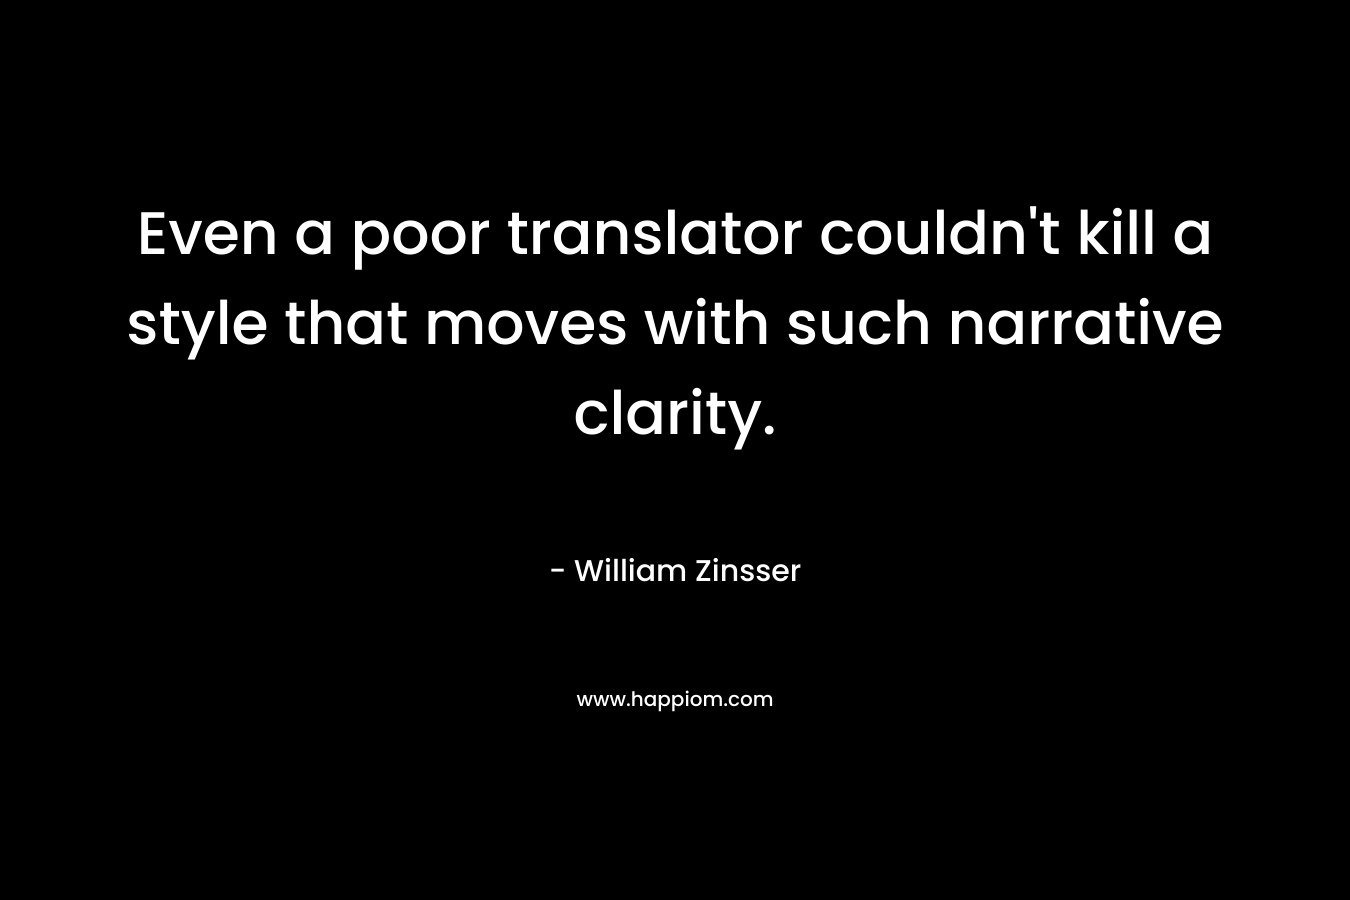 Even a poor translator couldn’t kill a style that moves with such narrative clarity. – William Zinsser